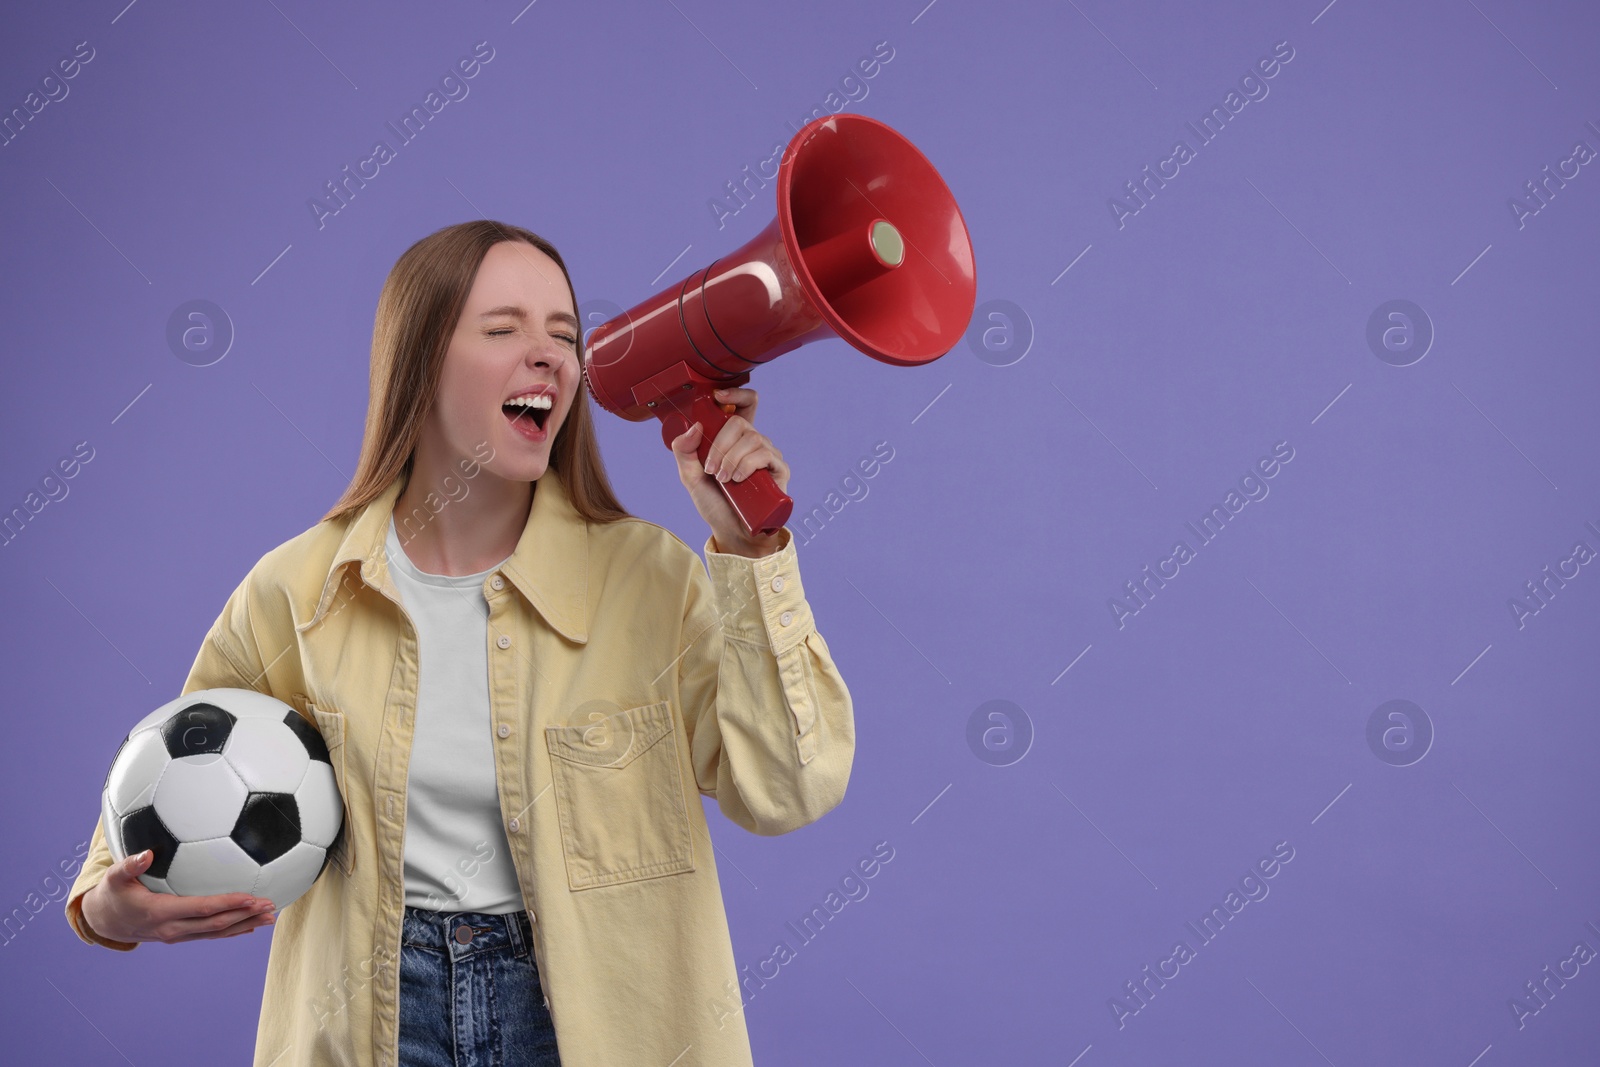 Photo of Emotional sports fan with ball and megaphone on purple background. Space for text